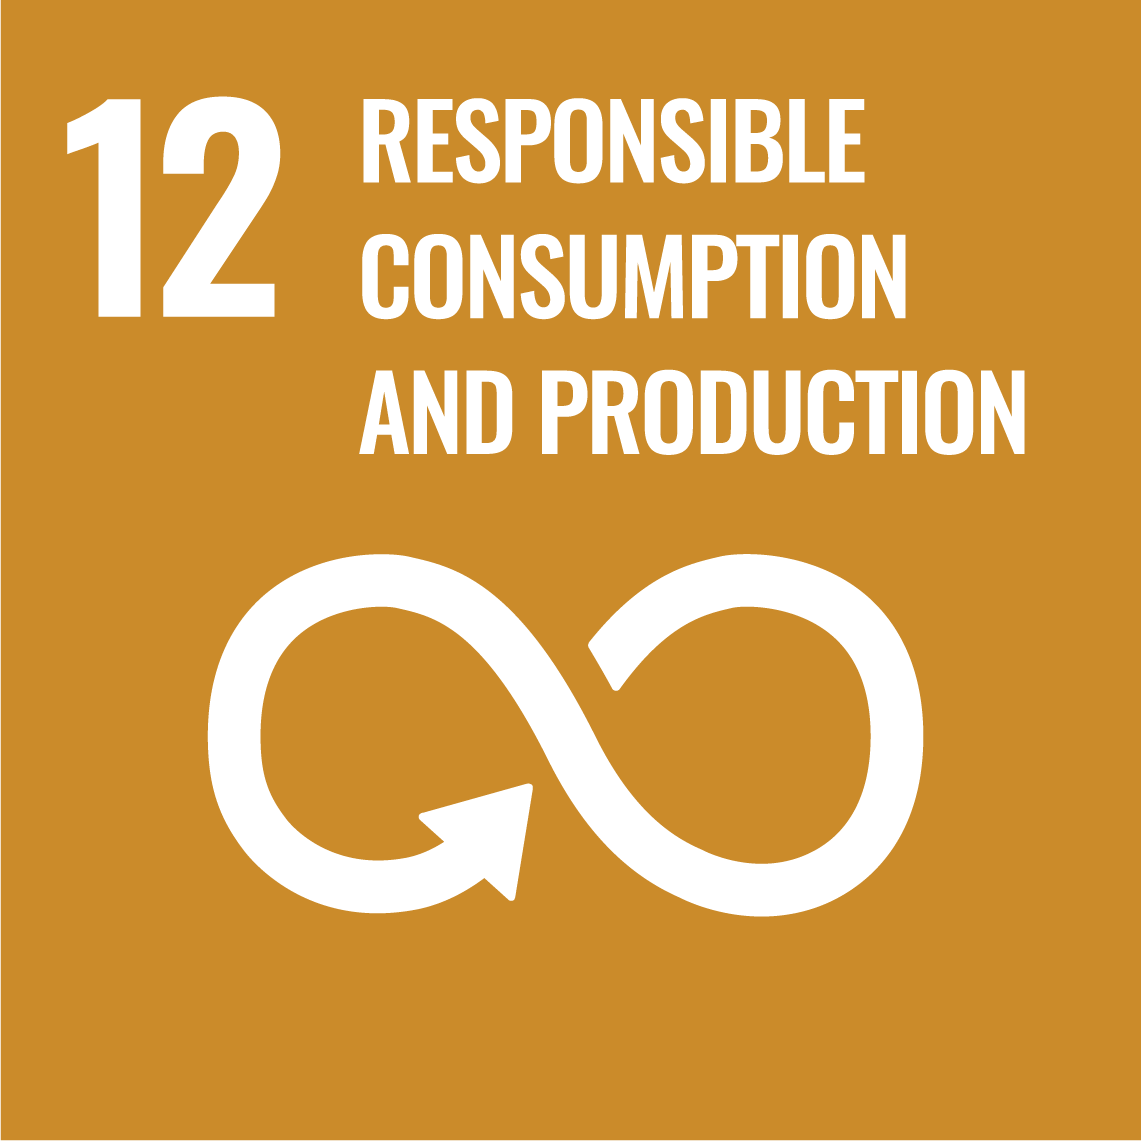 Sustainable Development Goals 12 - Responsible consumption and production